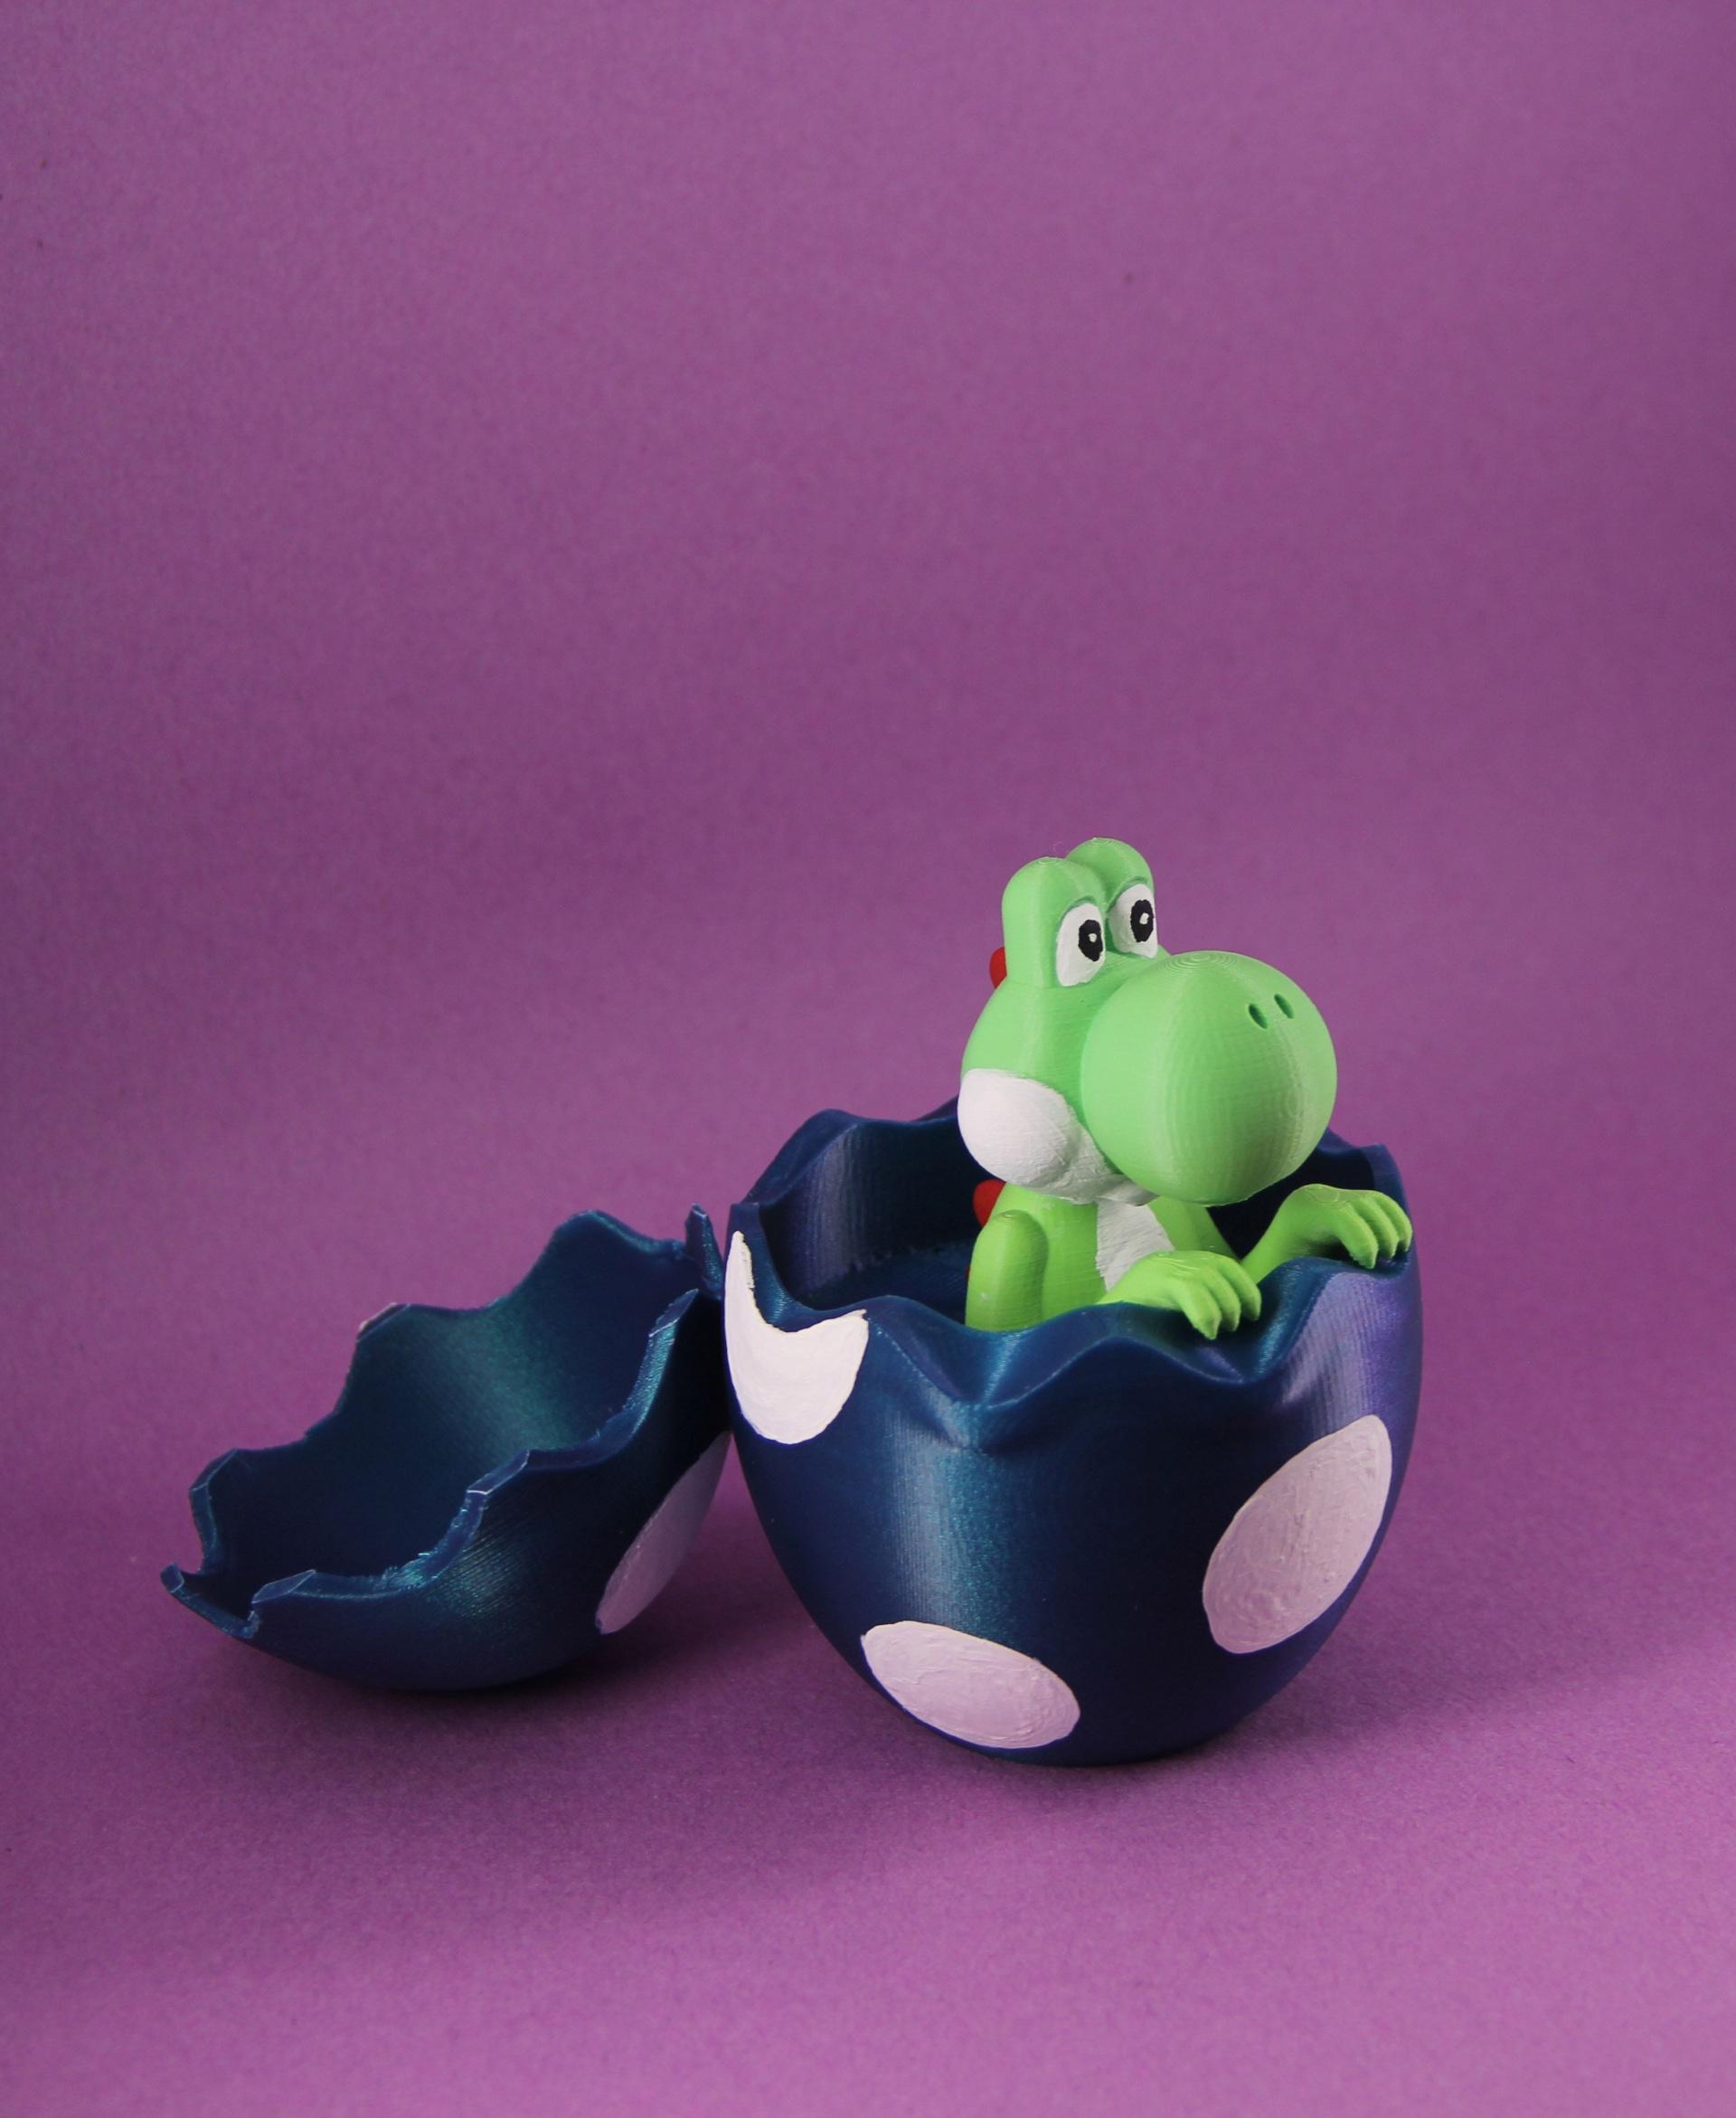 Yoshi Easter Egg - Printed in Polymaker Gradient Summer and Starlight Neptune, handpainted details - 3d model